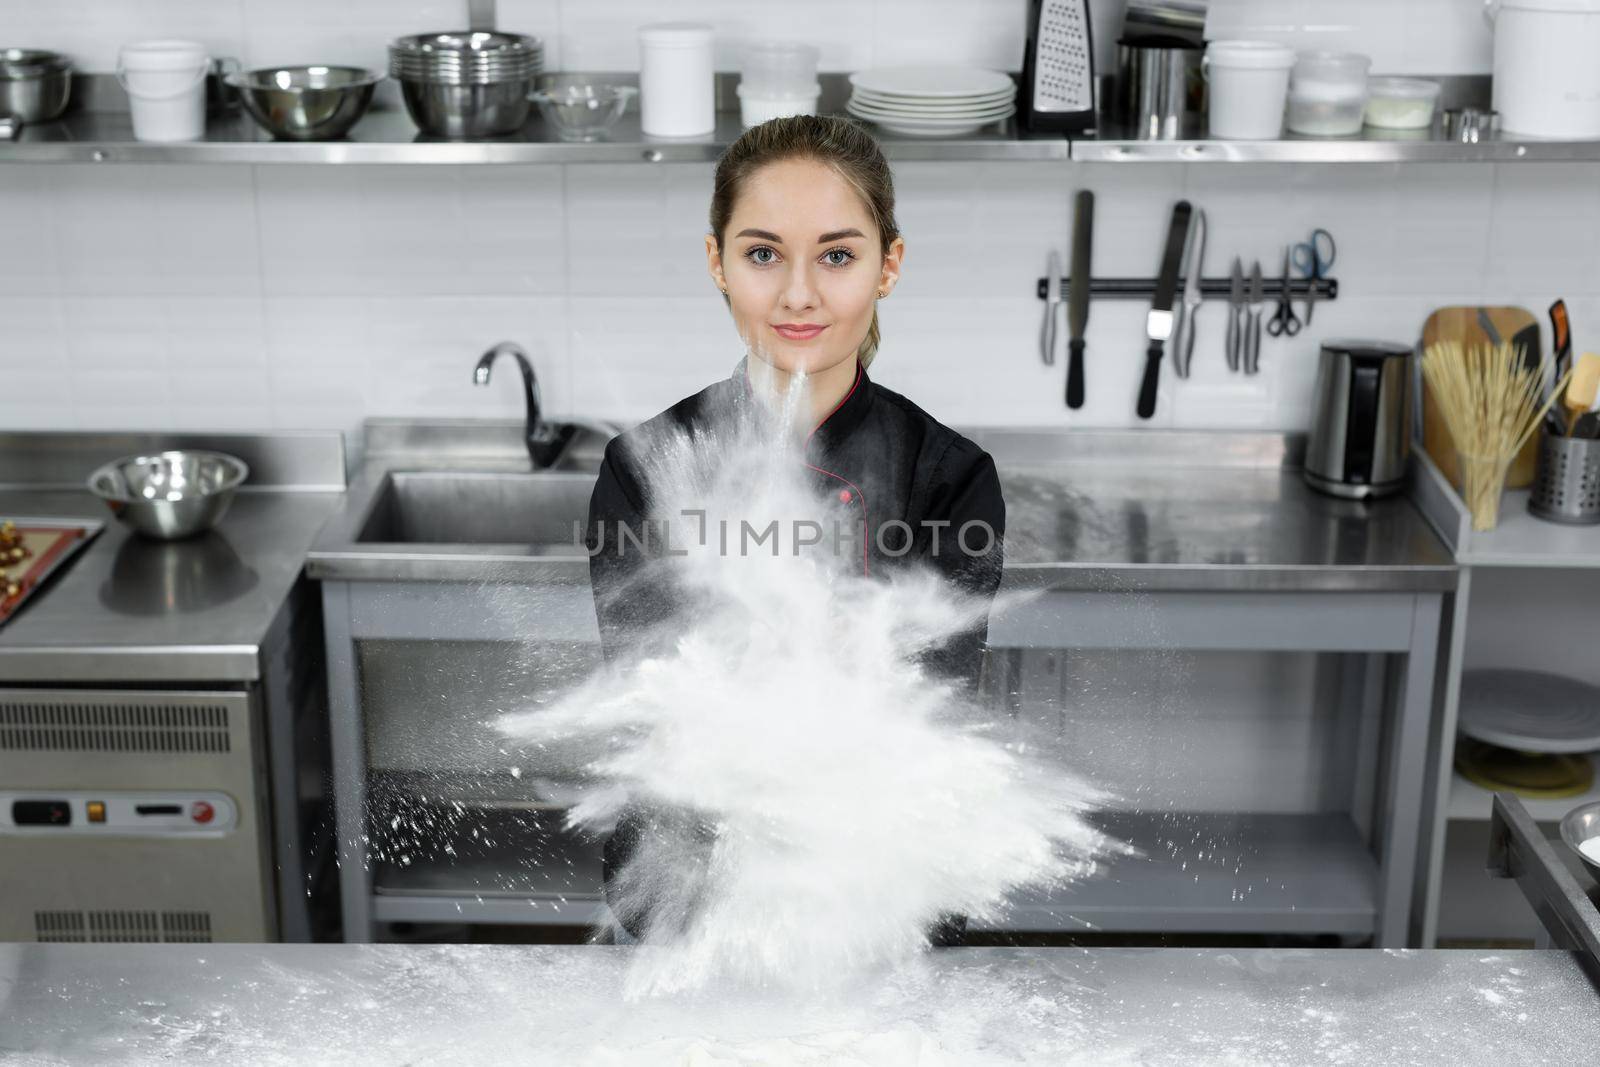 Pastry chef claps his hands and the flour is scattered all over the kitchen.